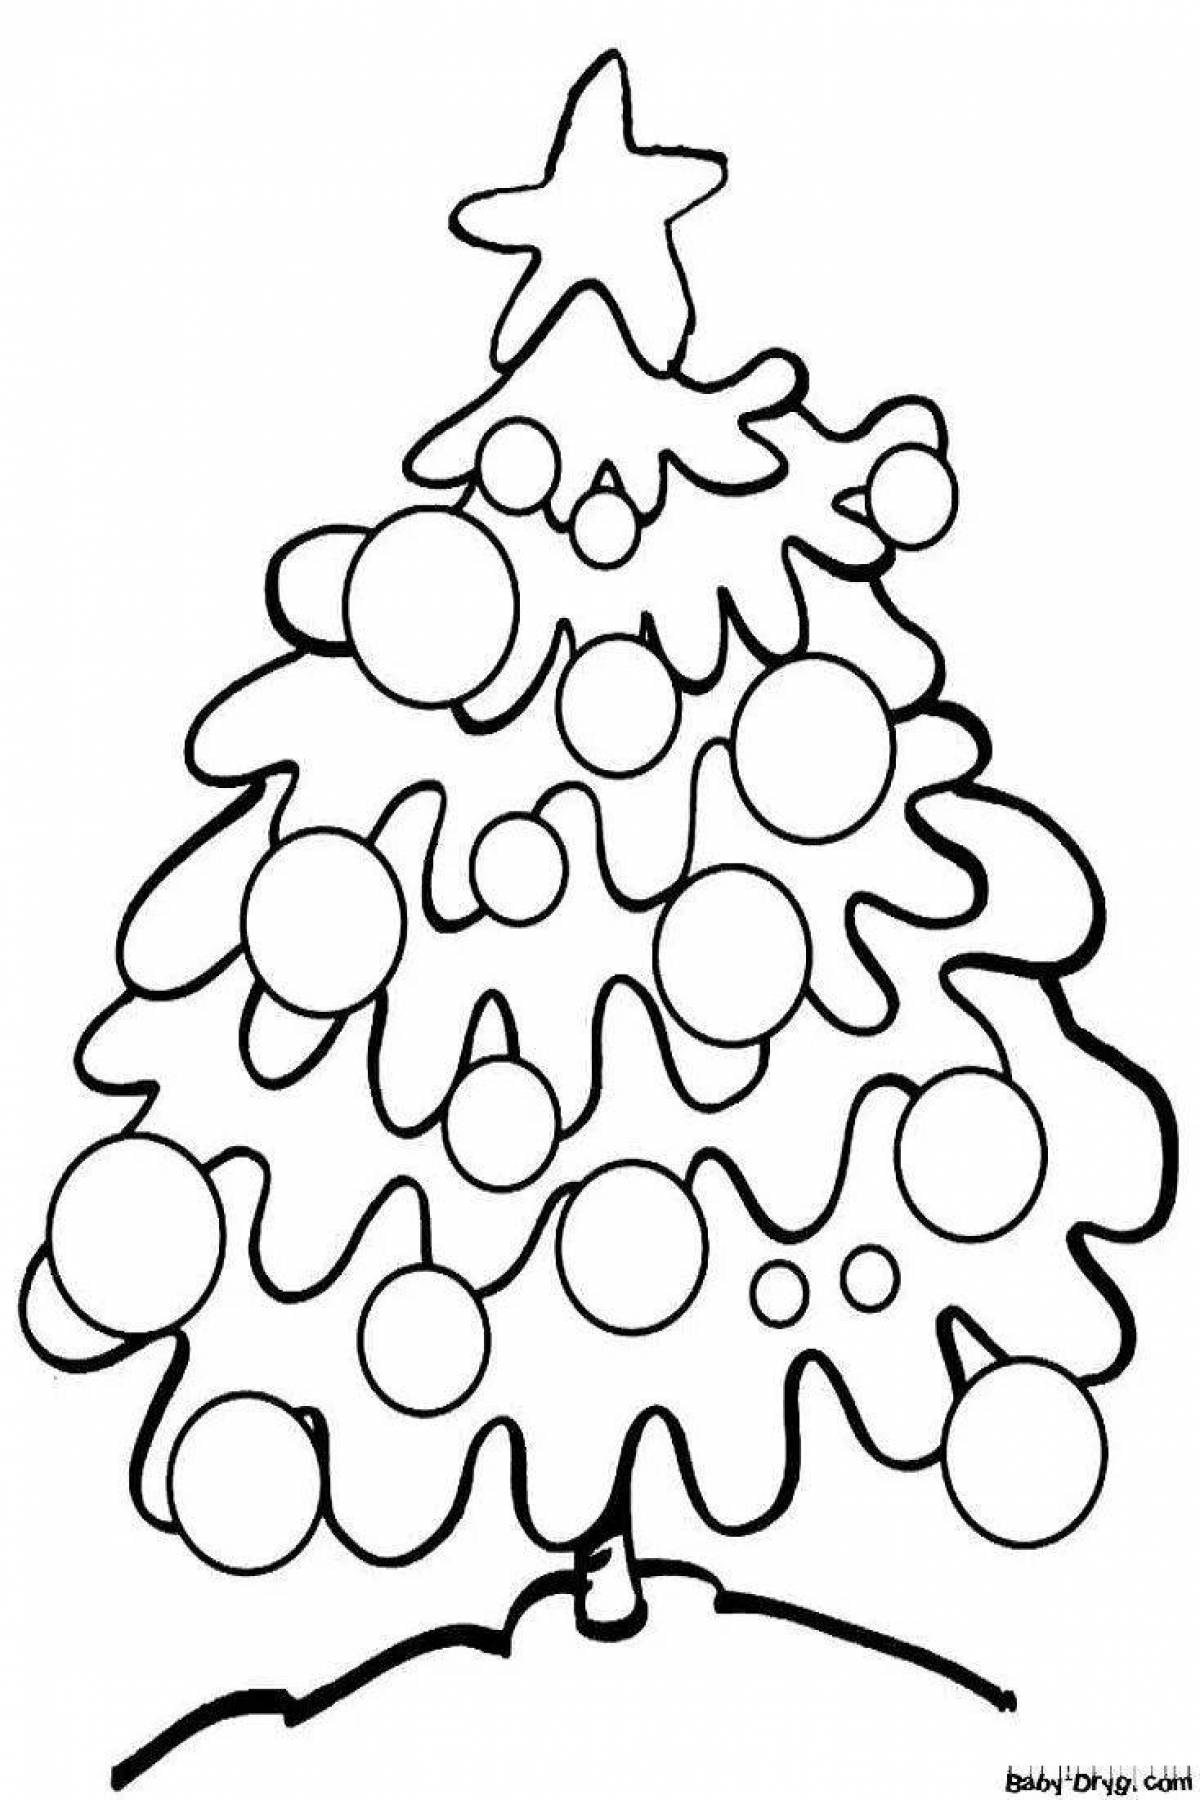 Merry Christmas coloring book for the little ones